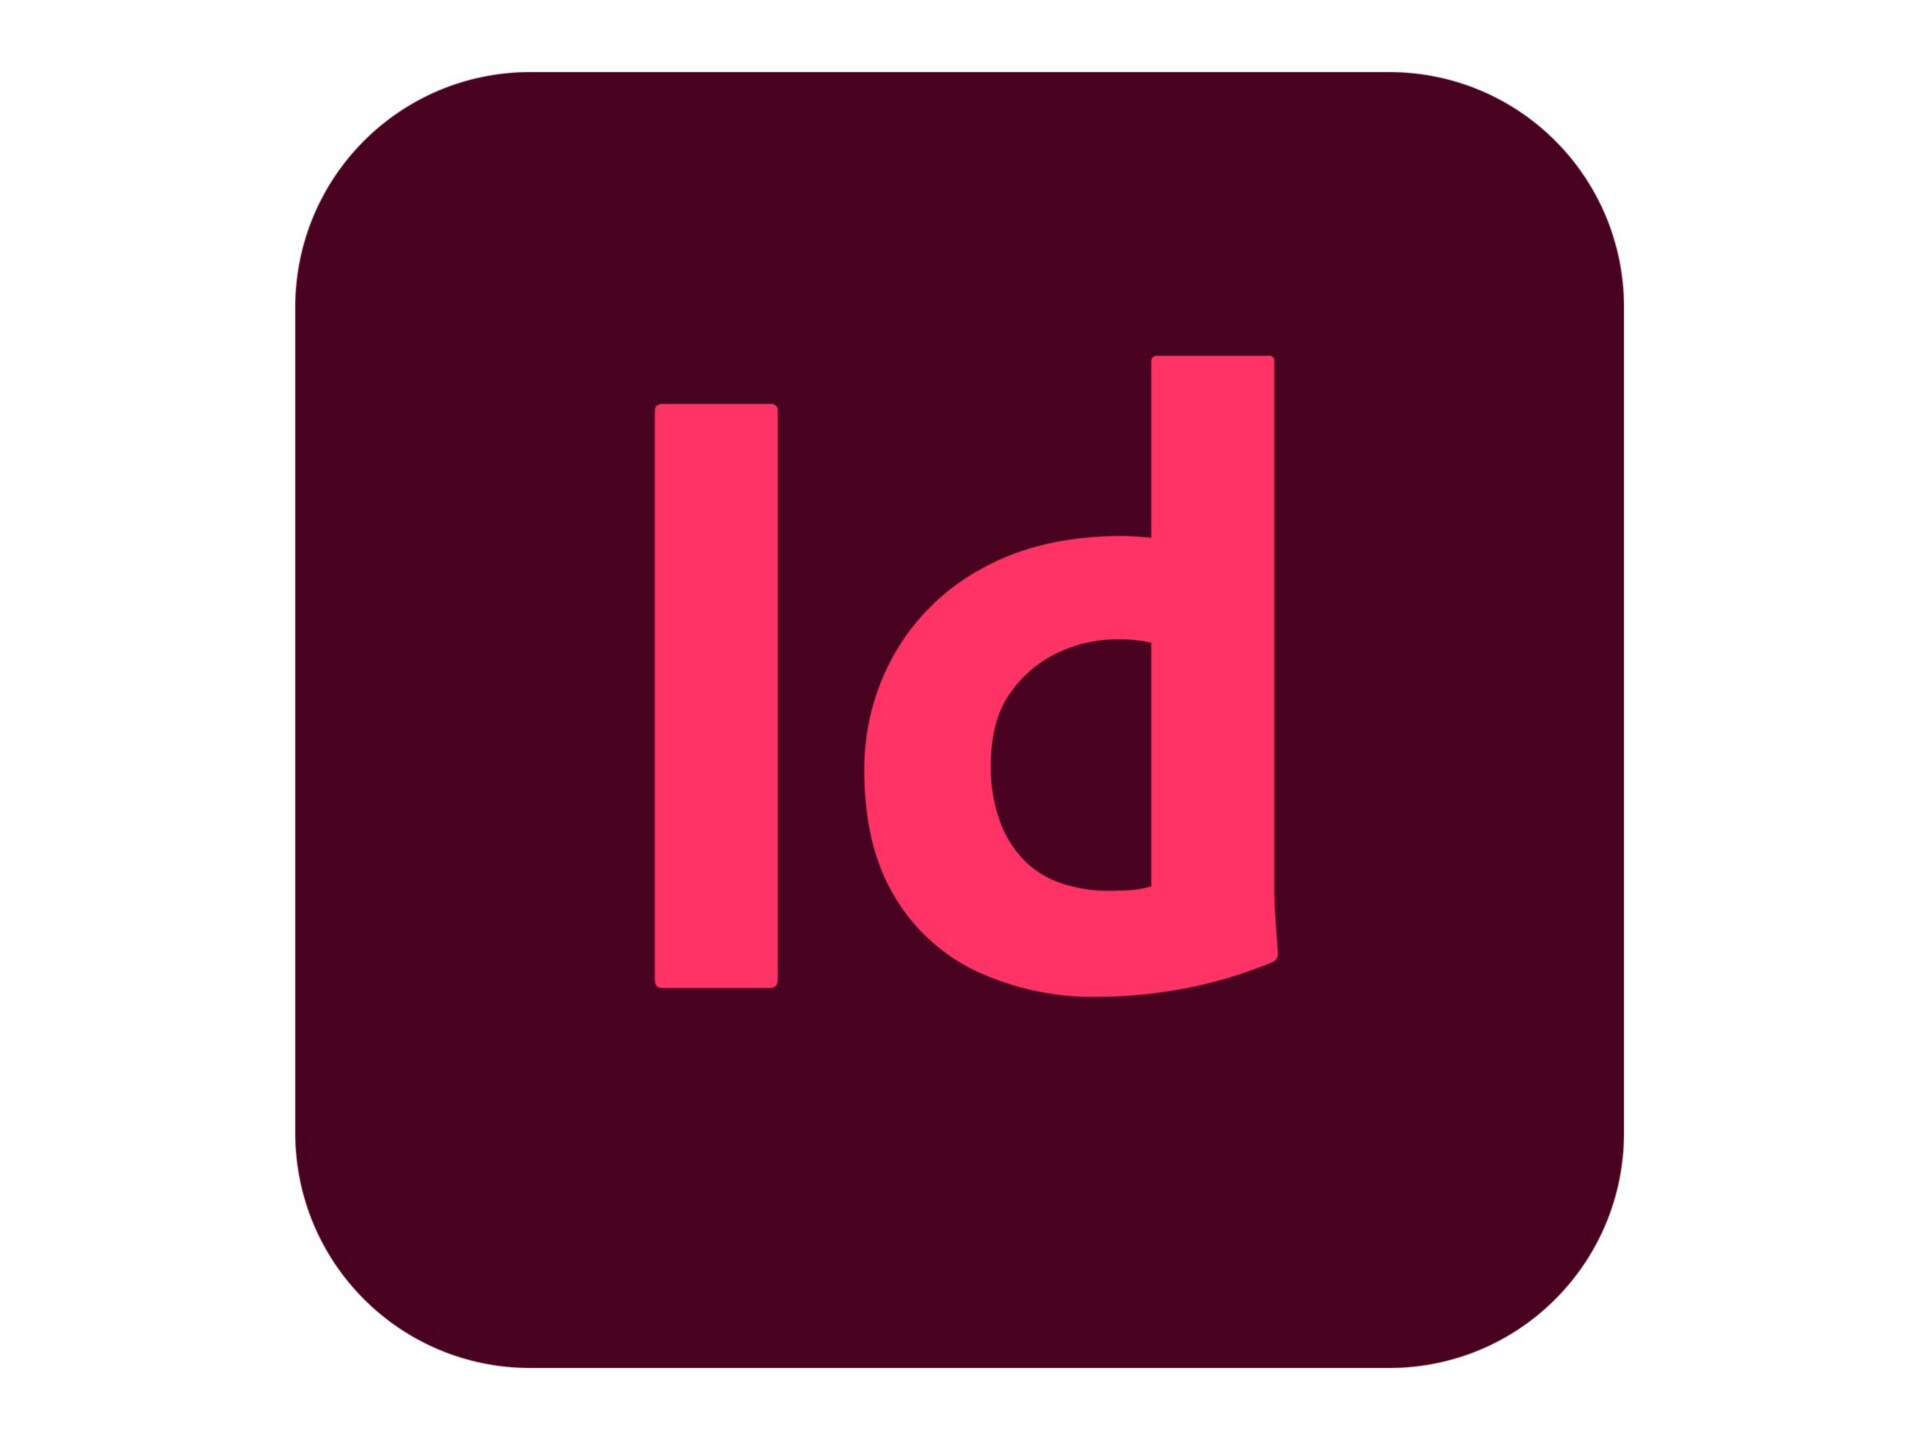 Adobe InDesign CC for teams - Subscription New (28 months) - 1 named user